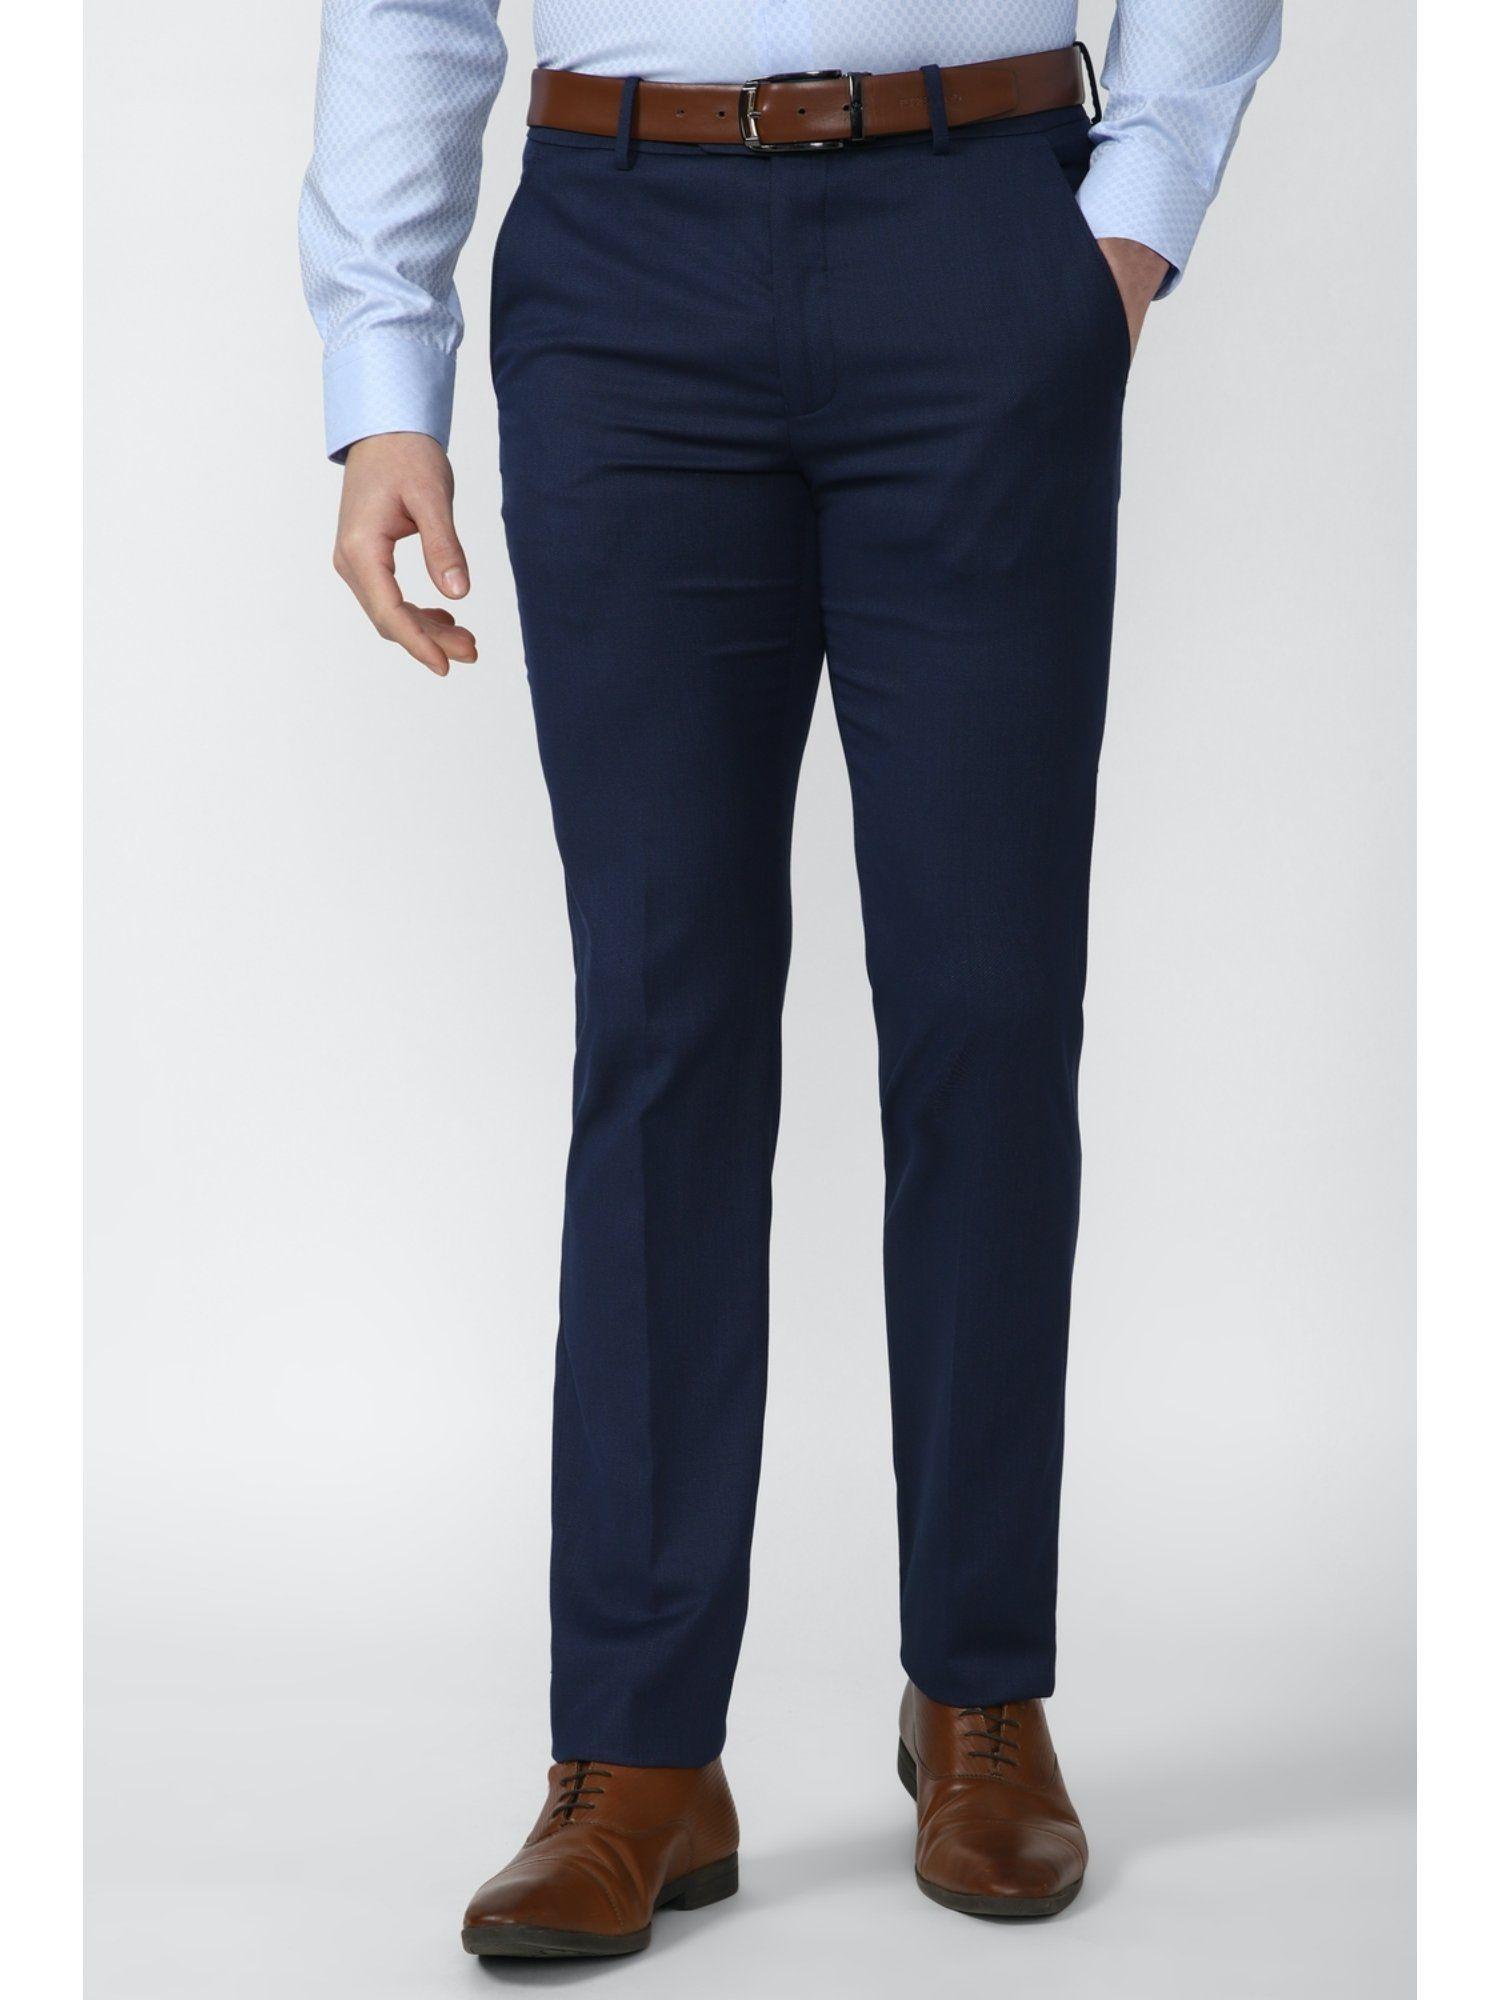 solid navy trousers